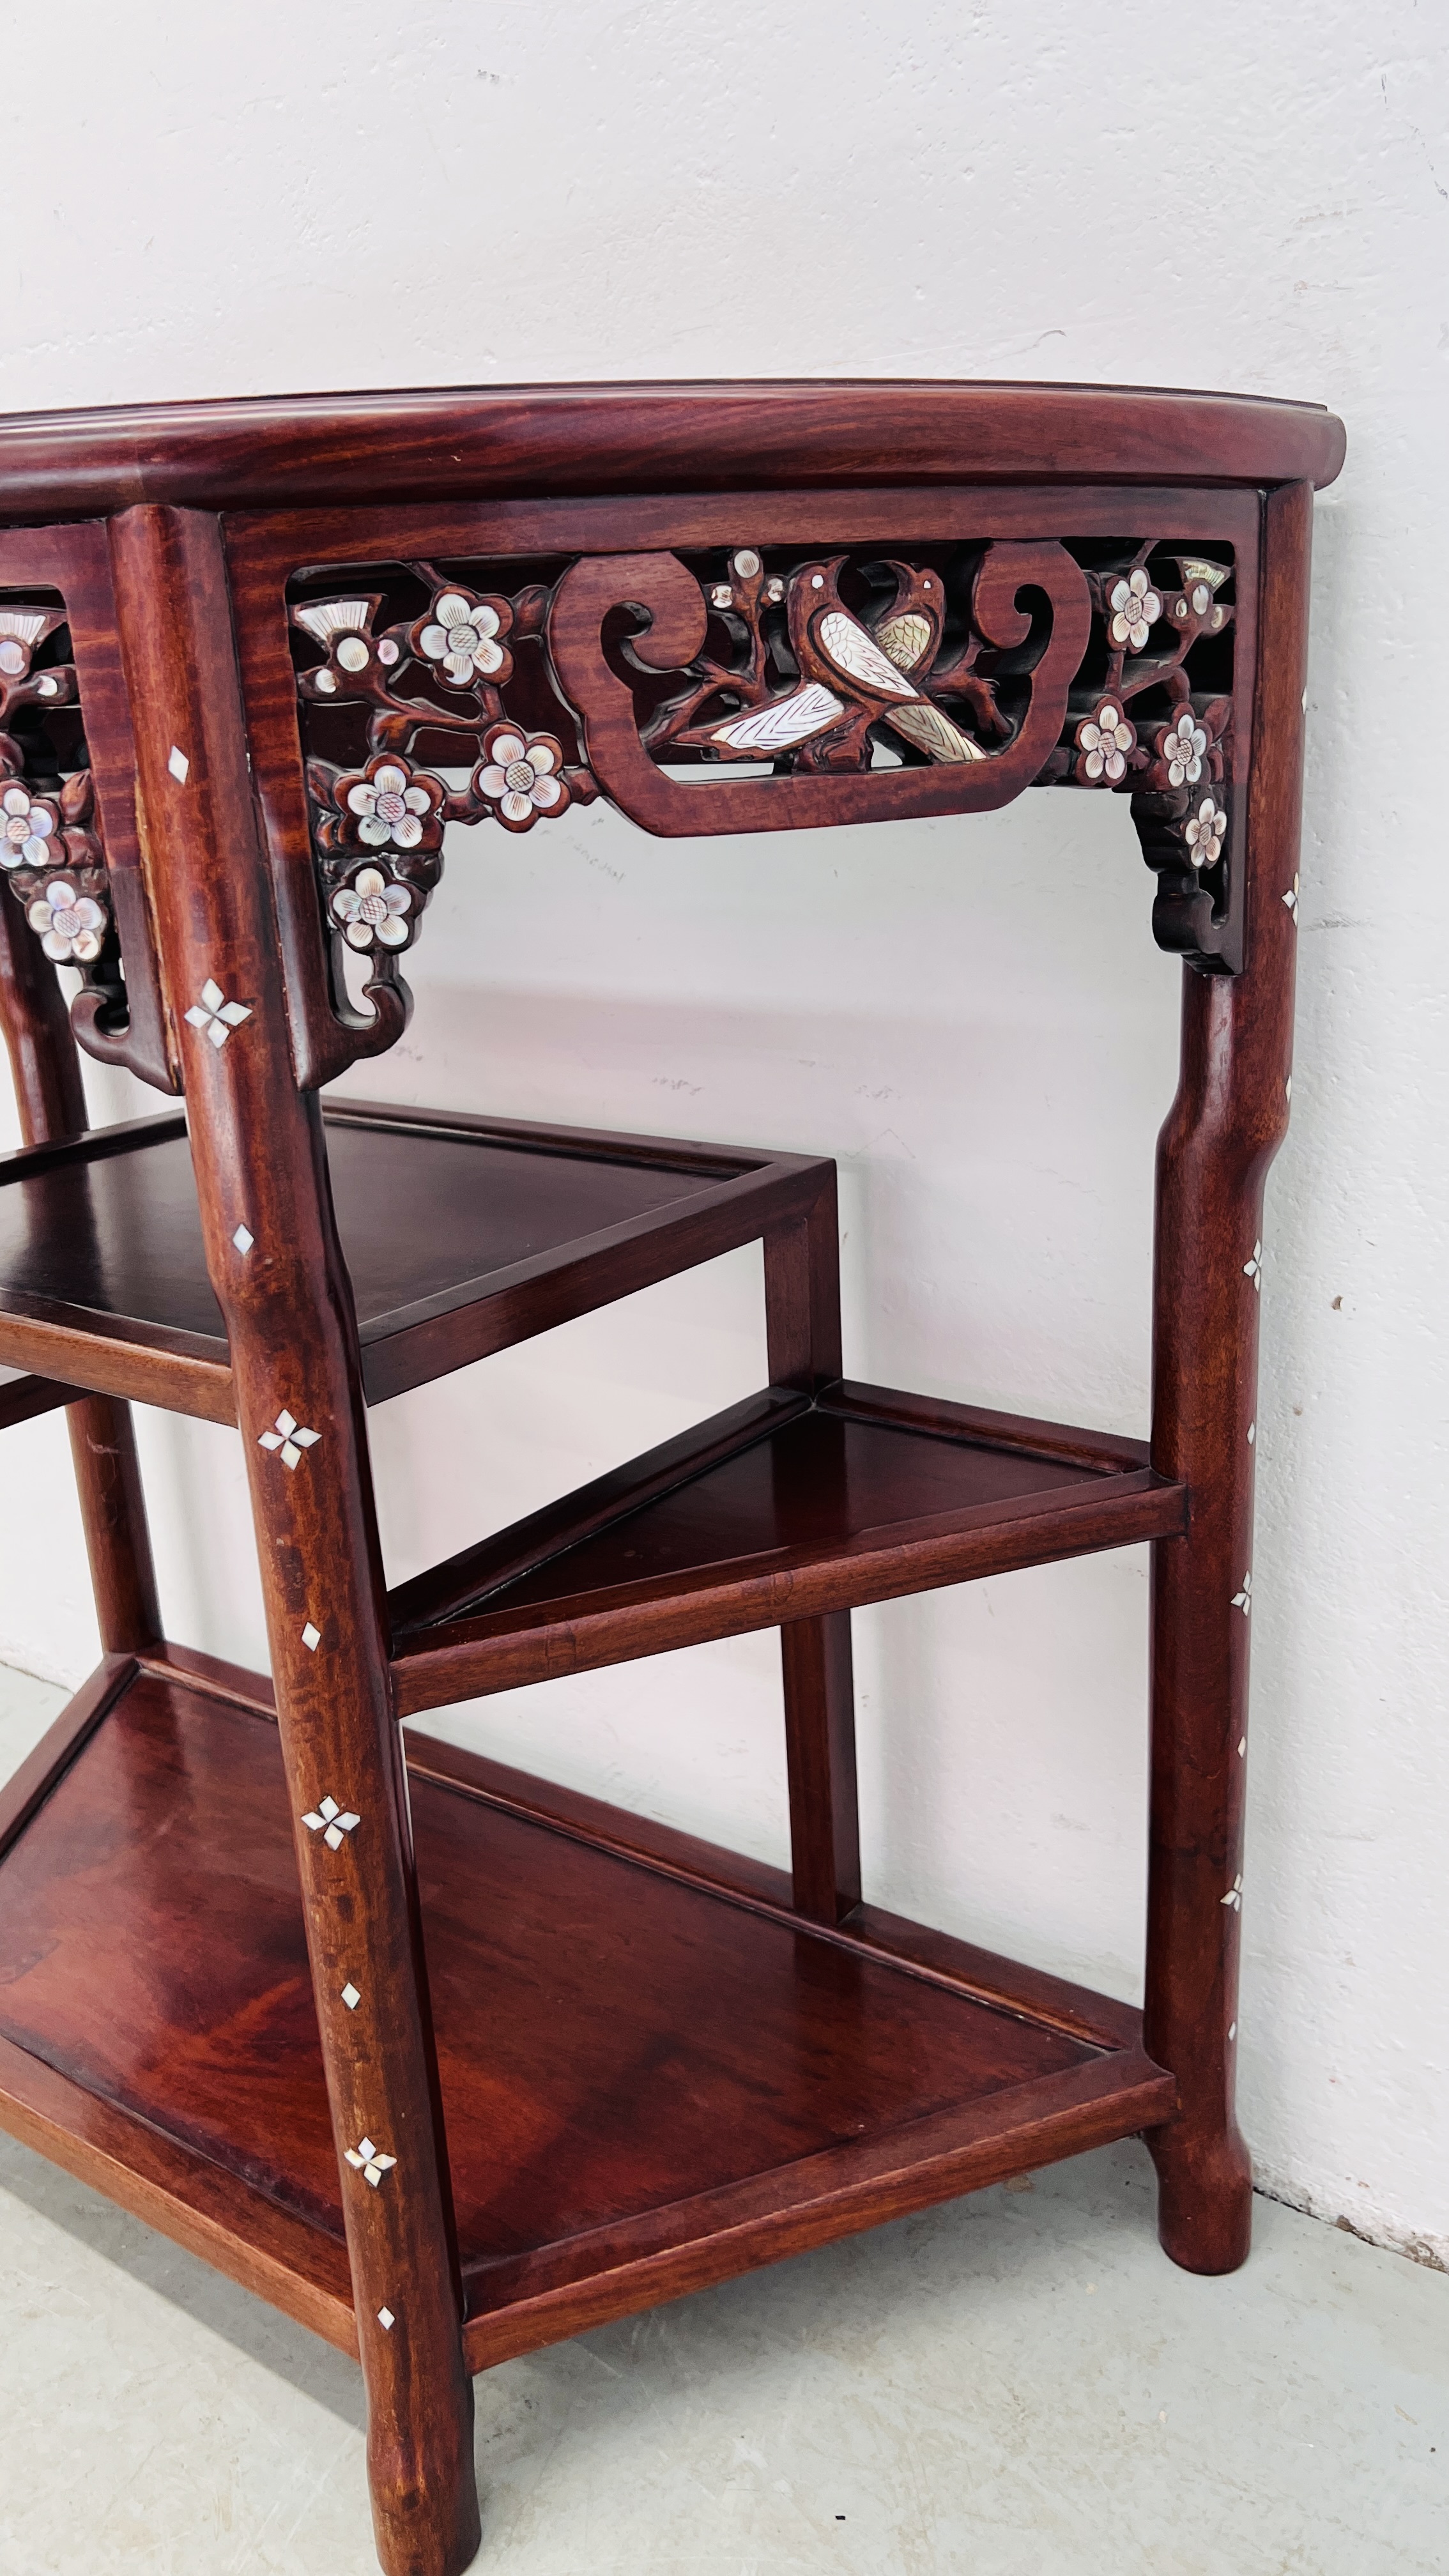 AN ORIENTAL HARDWOOD AND MOTHER OF PEARL INLAID SIDE TABLE WITH SHELF BELOW. - Image 6 of 9